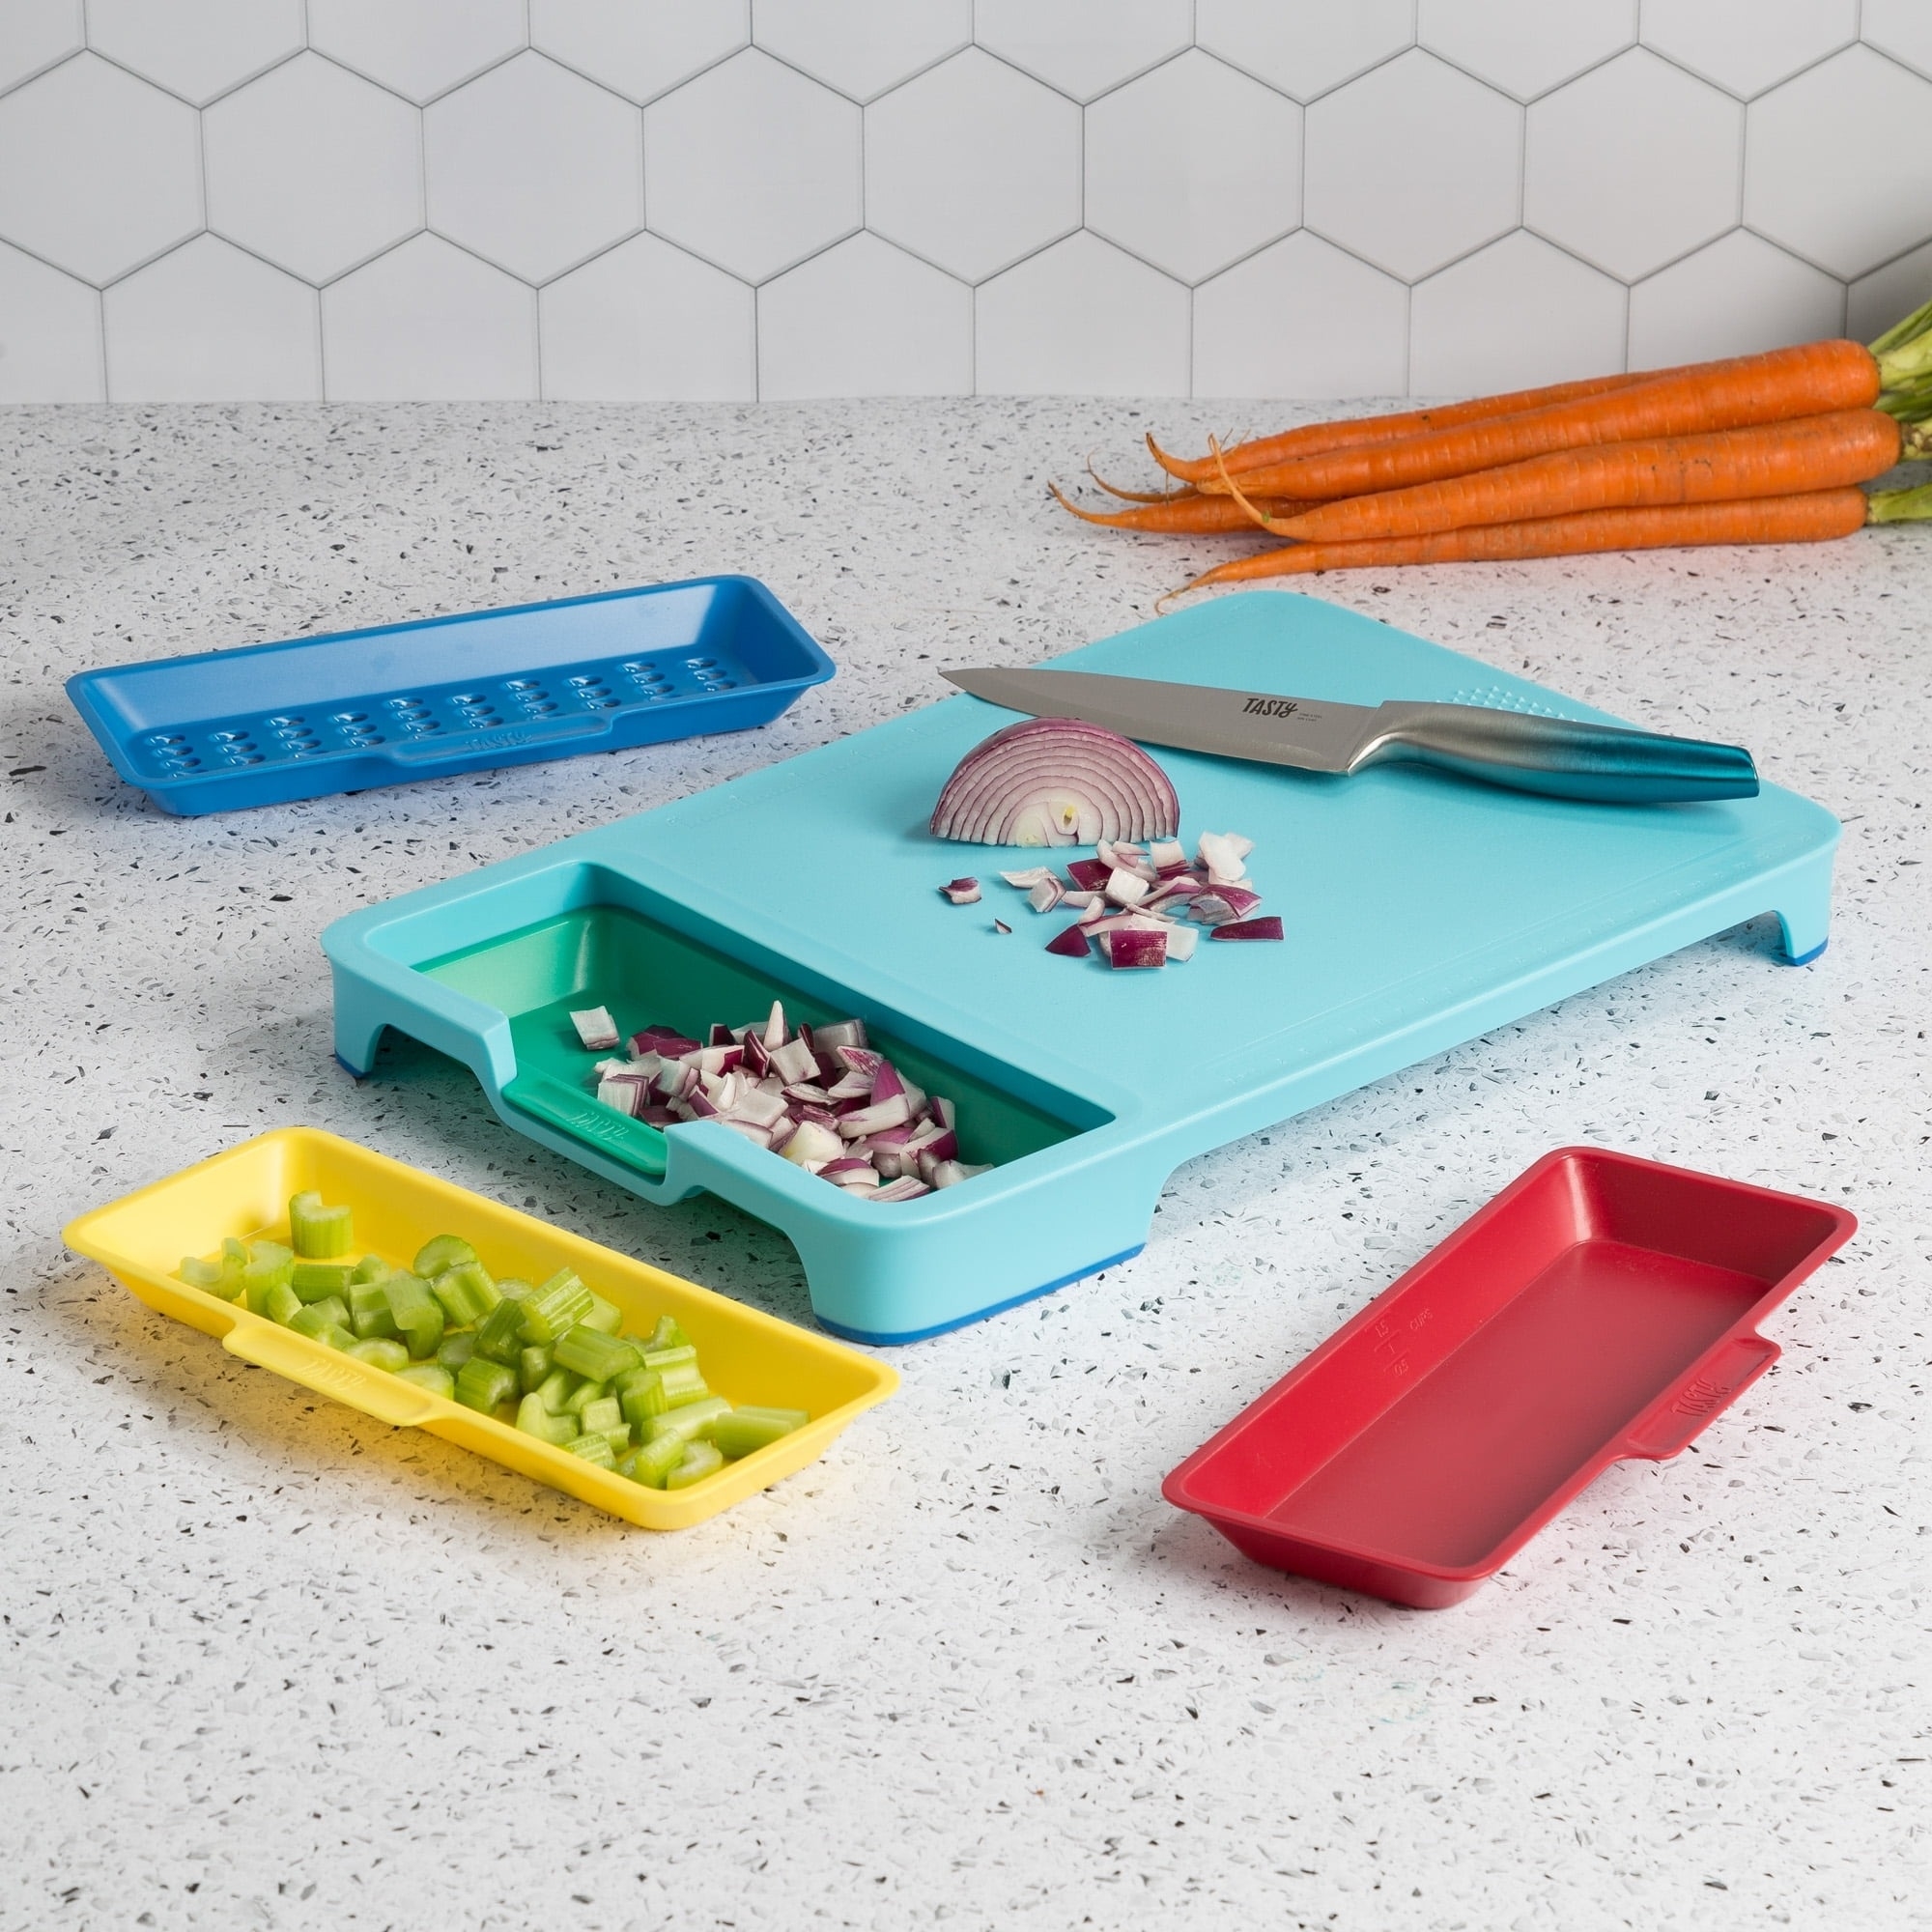 A kitchen counter with a blue cutting board featuring built-in trays and a mandoline slicer, surrounded by chopped vegetables